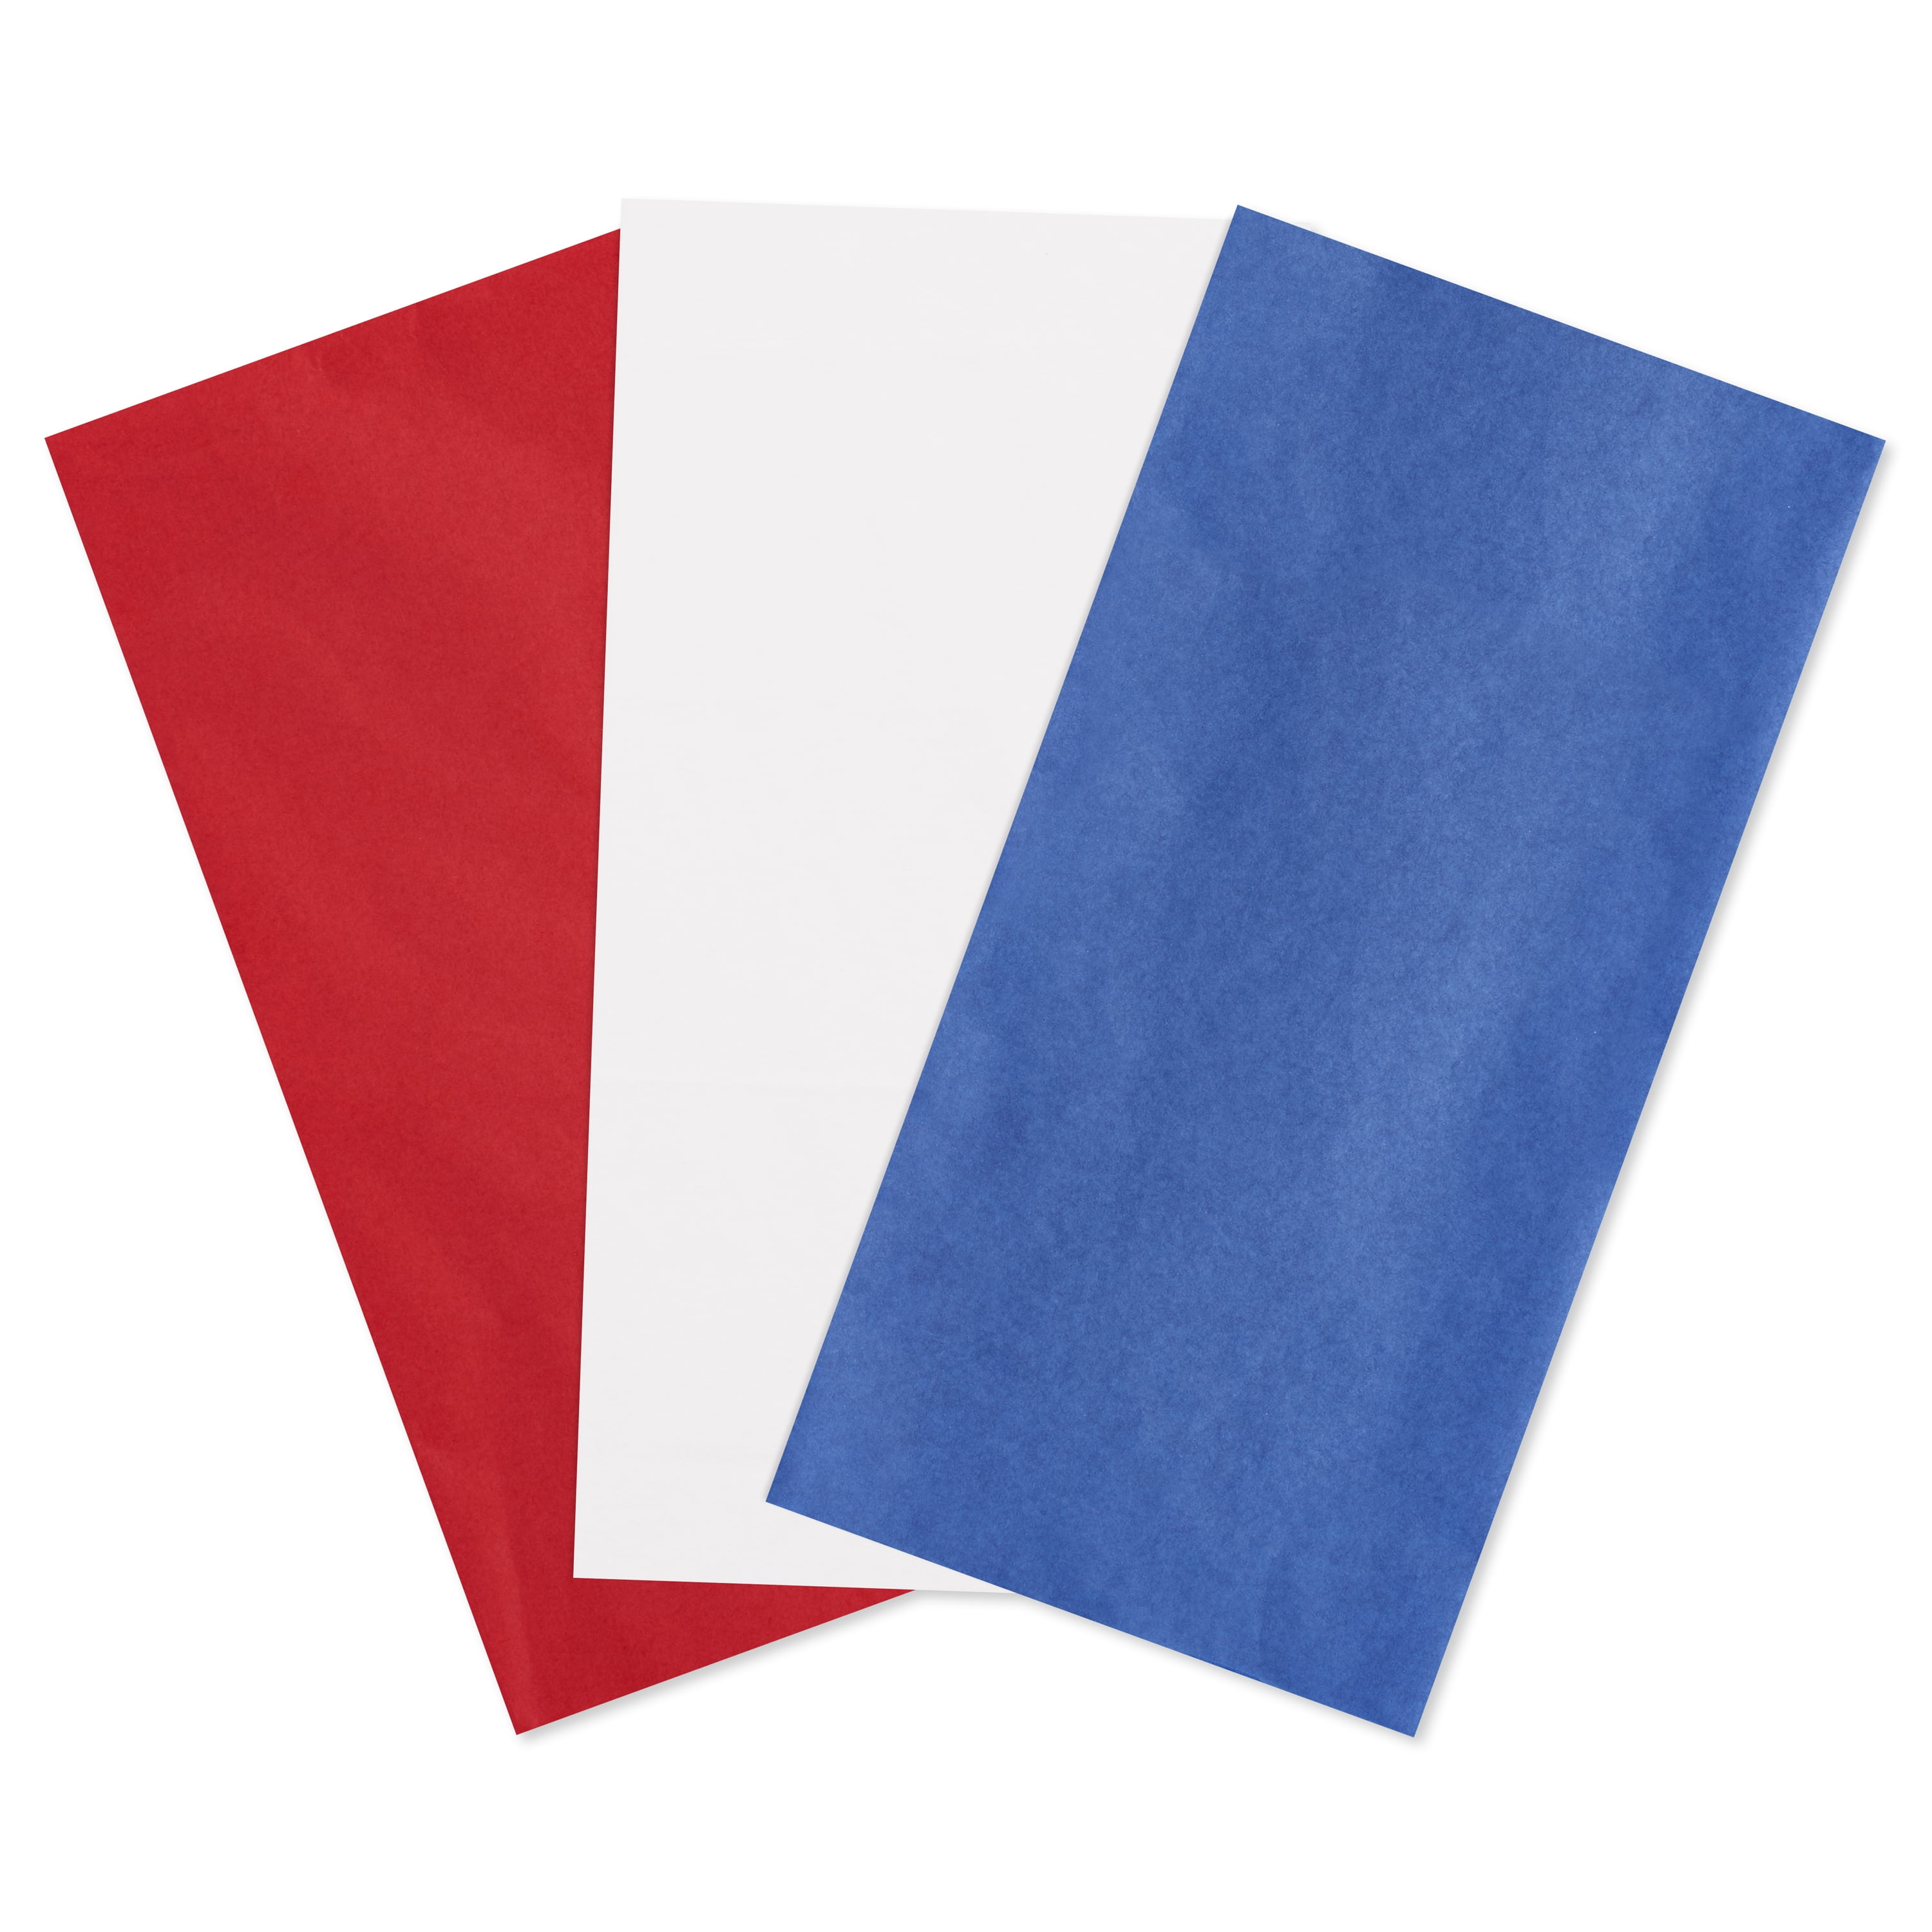 American Greetings 125 Sheet Bulk Red, White, and Blue Tissue